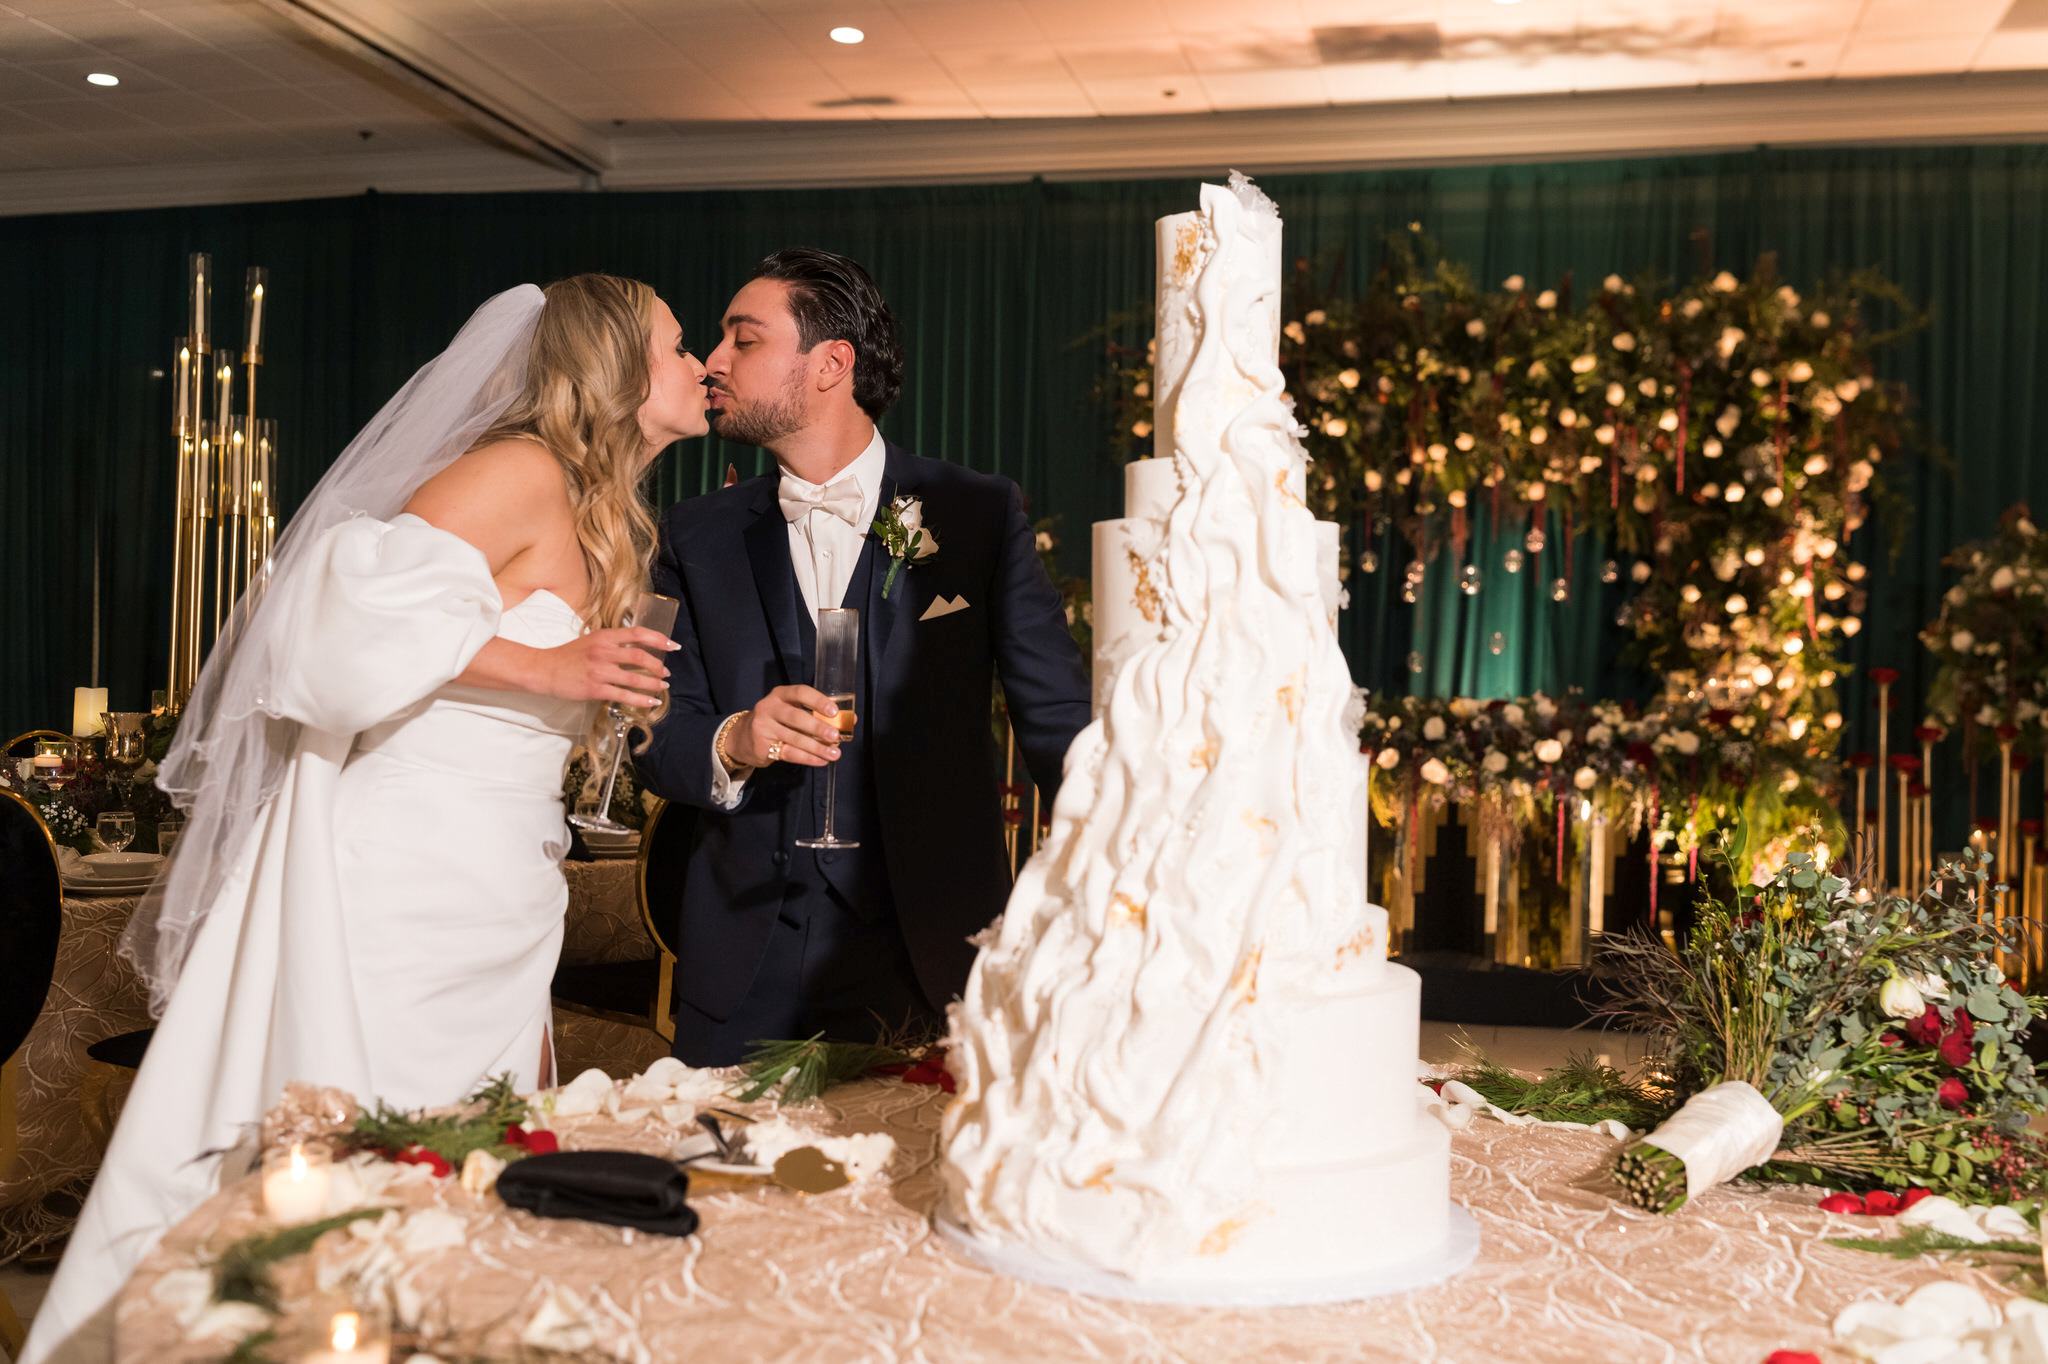 Bride and groom kiss after cutting their cake at their Penna's of Sterling wedding reception